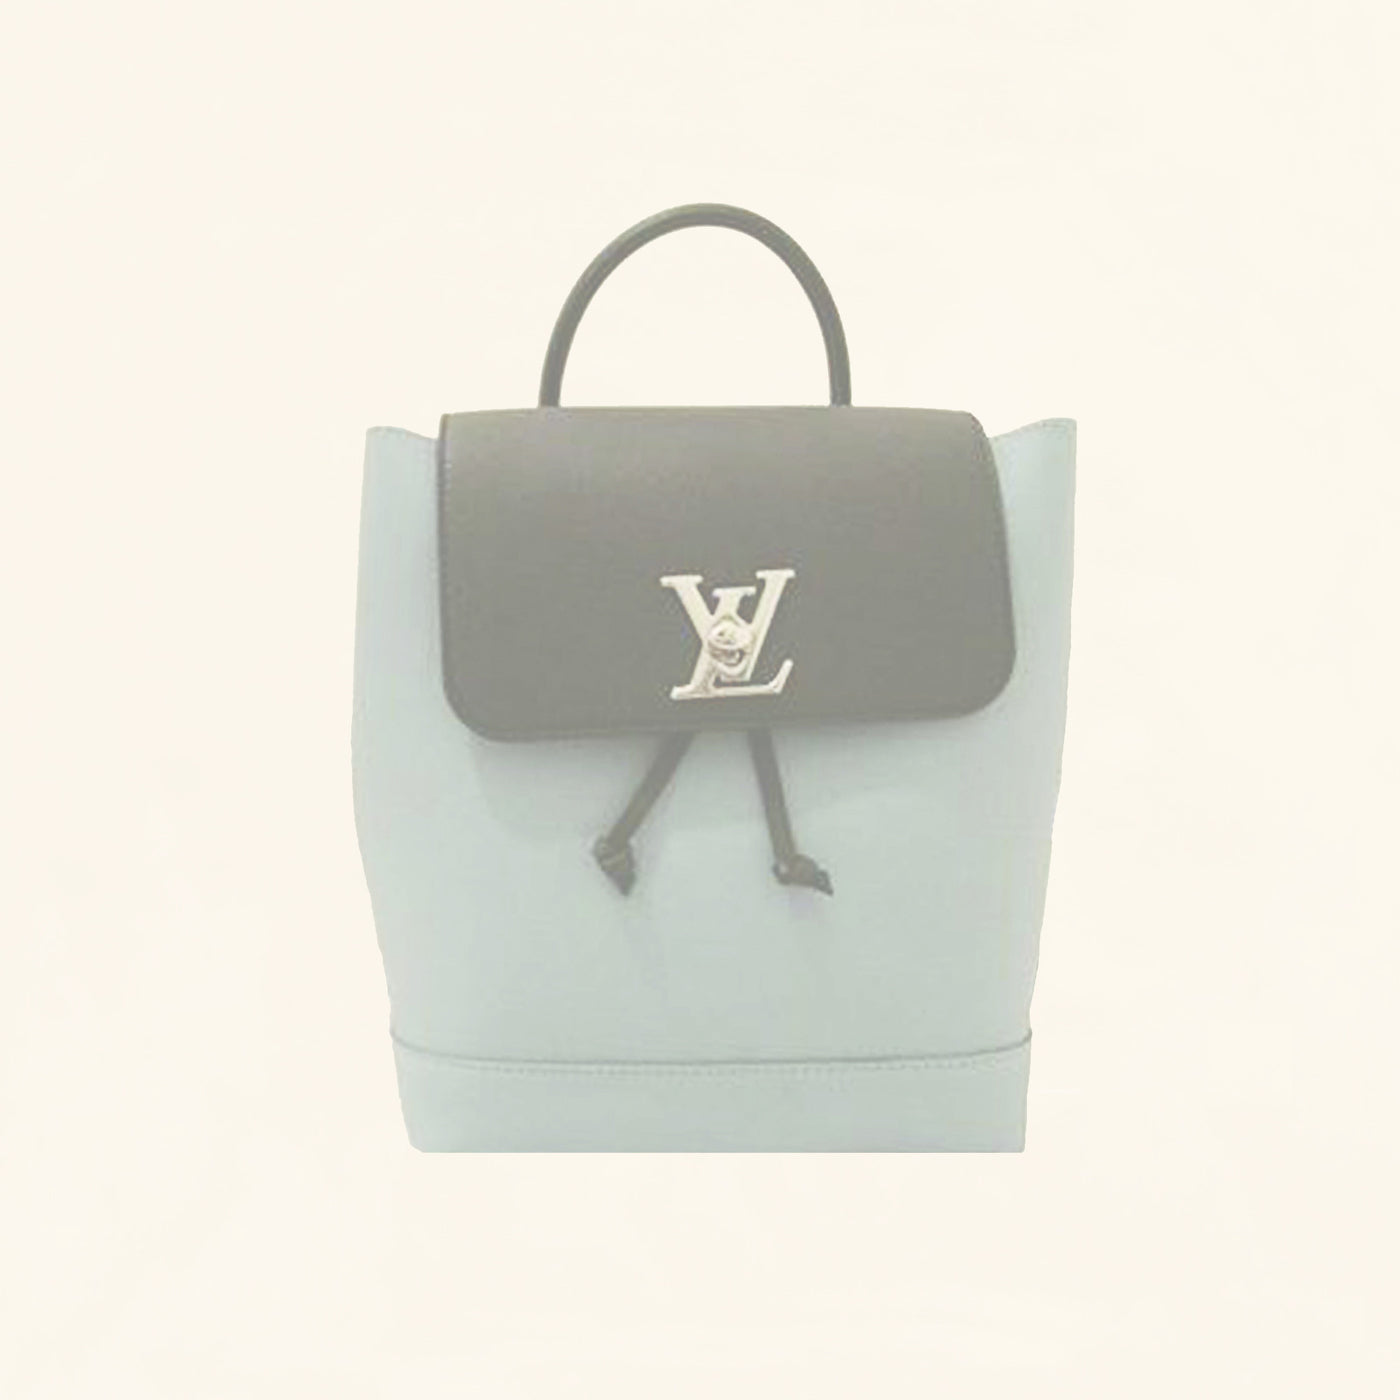 Gucci Bag Code For Roblox Ontario Active School Travel - Free Robux Codes Roblox Toys Redeem